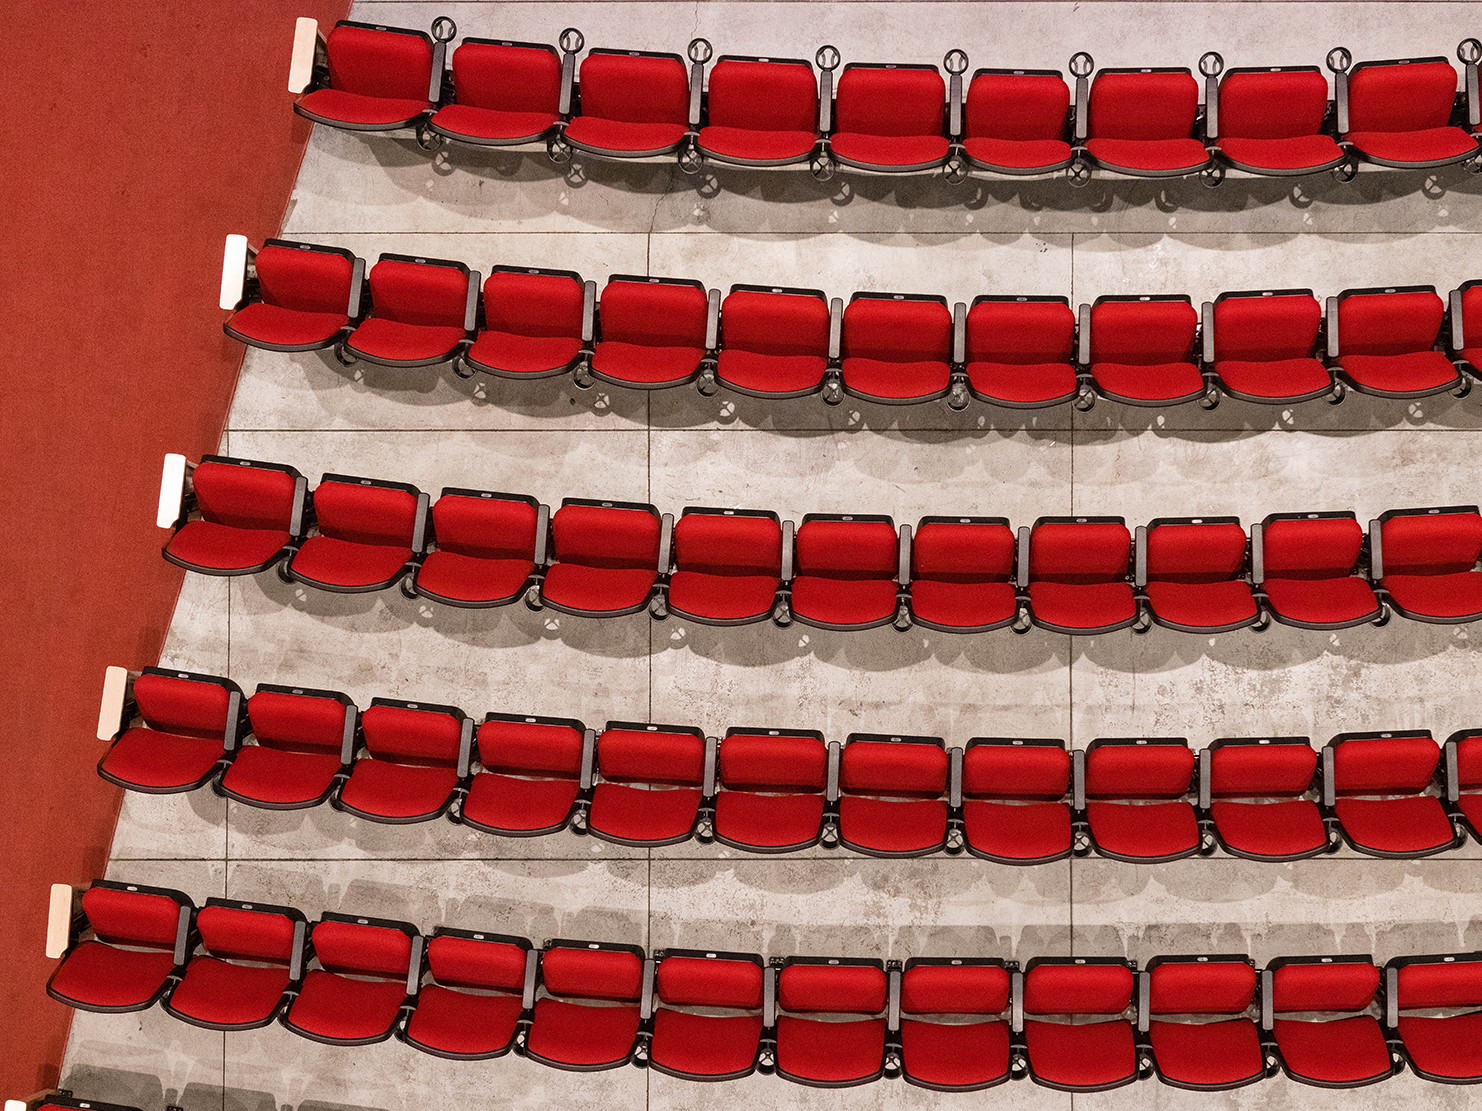 five continuous curved rows of red soft upholstered theater seats on gray concrete floors. a red carpet runs next to seats